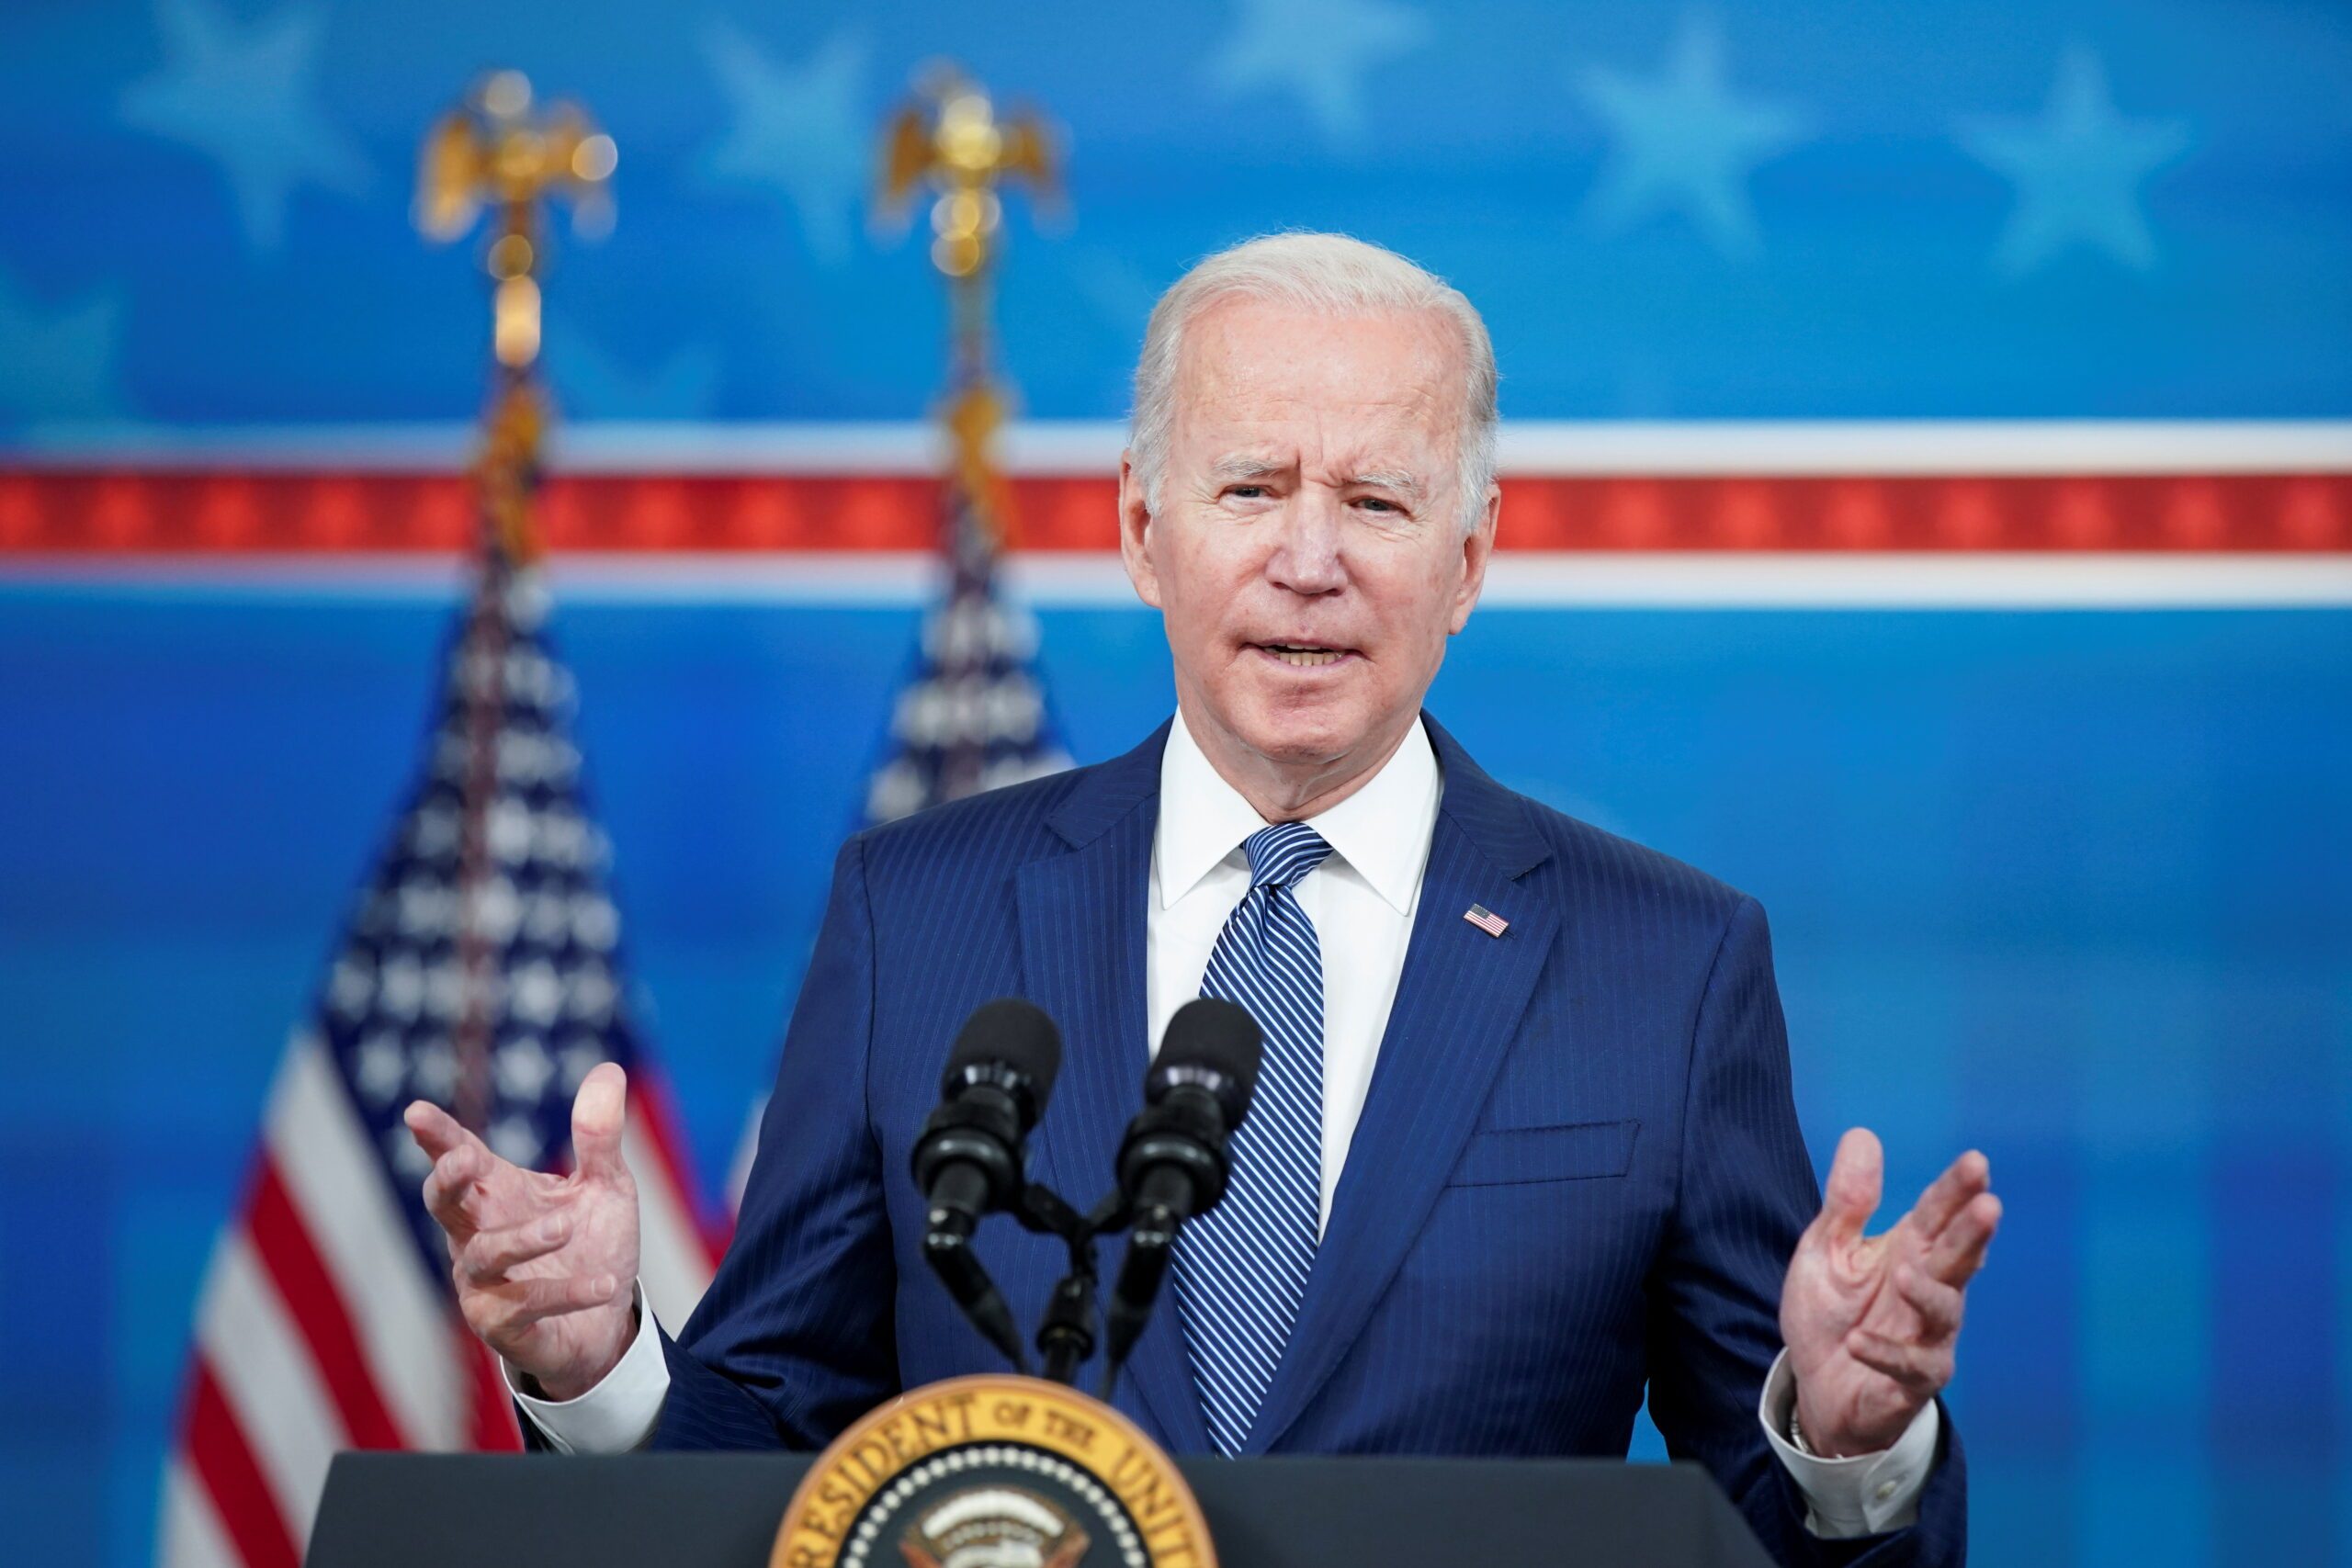 To fight Omicron, Biden adds travel rules, free at-home tests